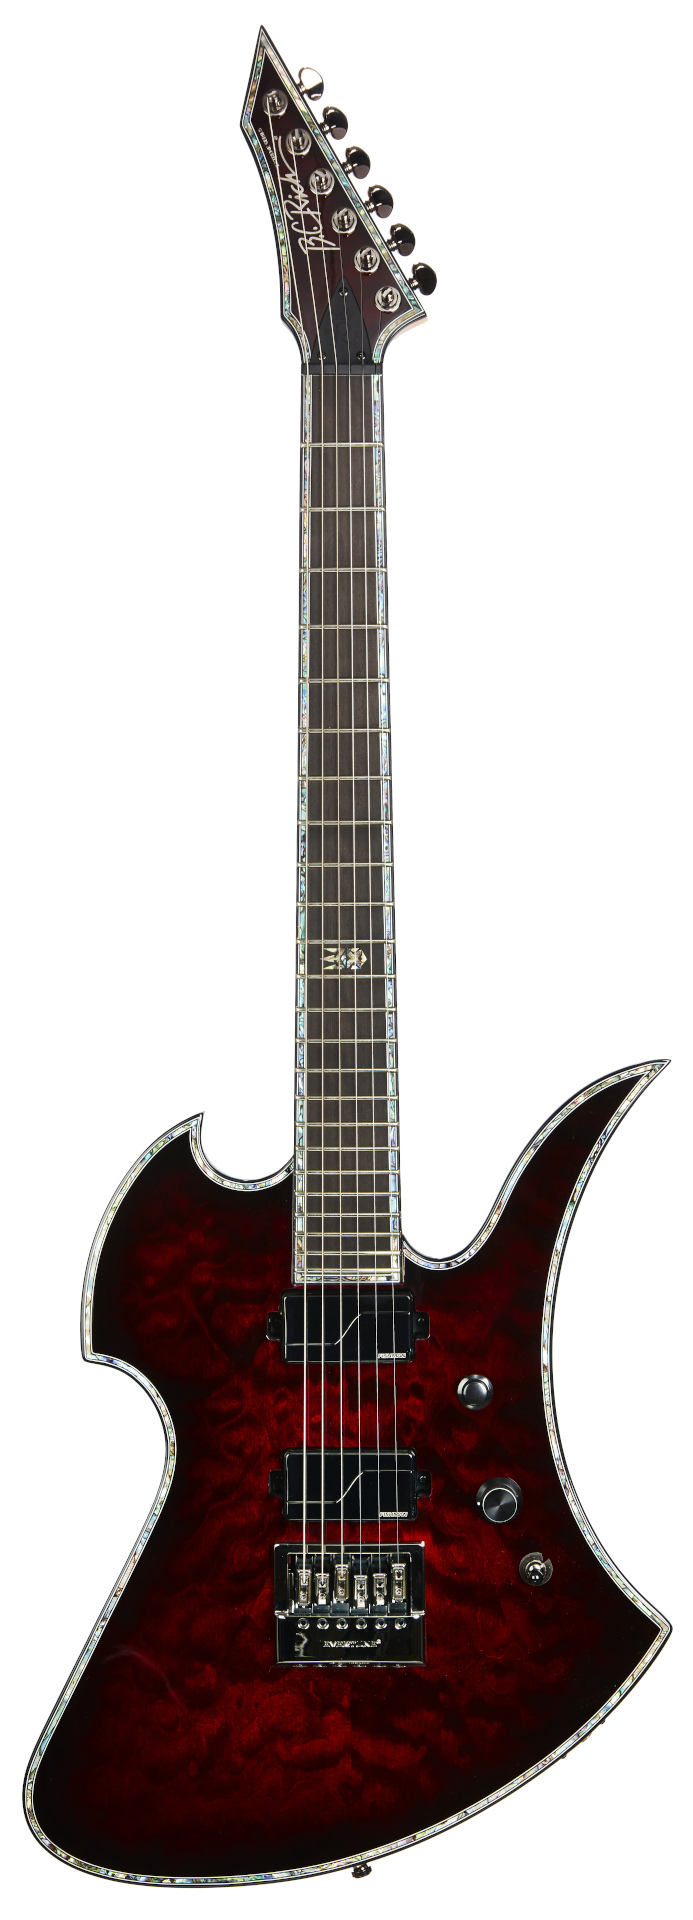 B.C. Rich Mockingbird Extreme Exotic with Evertune Bridge - Quilted Maple Top, Black Cherry